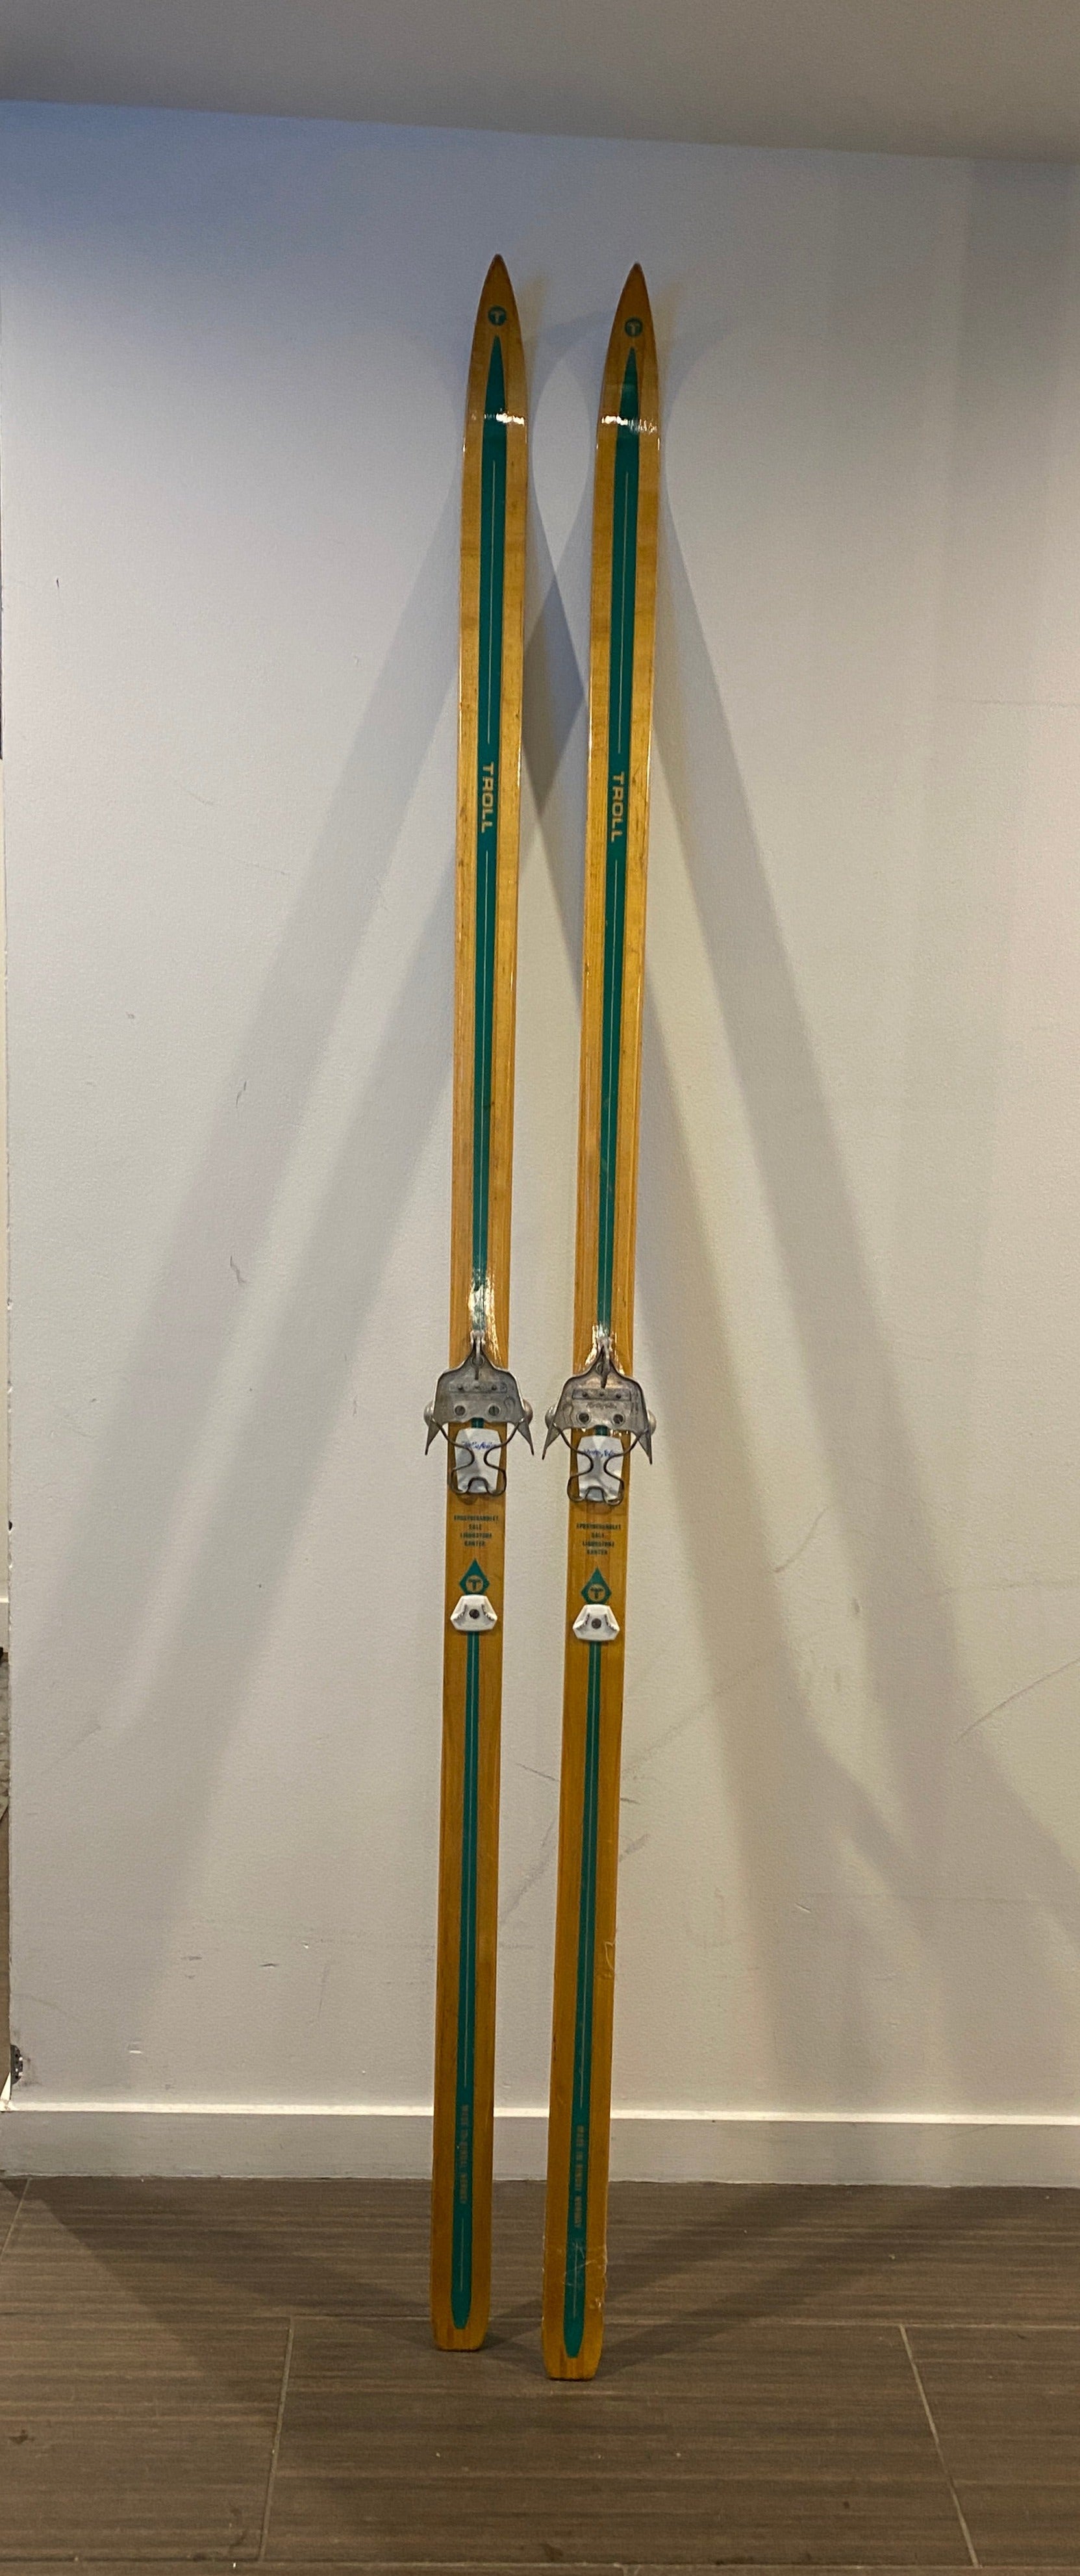 Vintage Troll 196cm skis, mounted with a pair of vintage 3-pin Rottefella bindings, front of skis